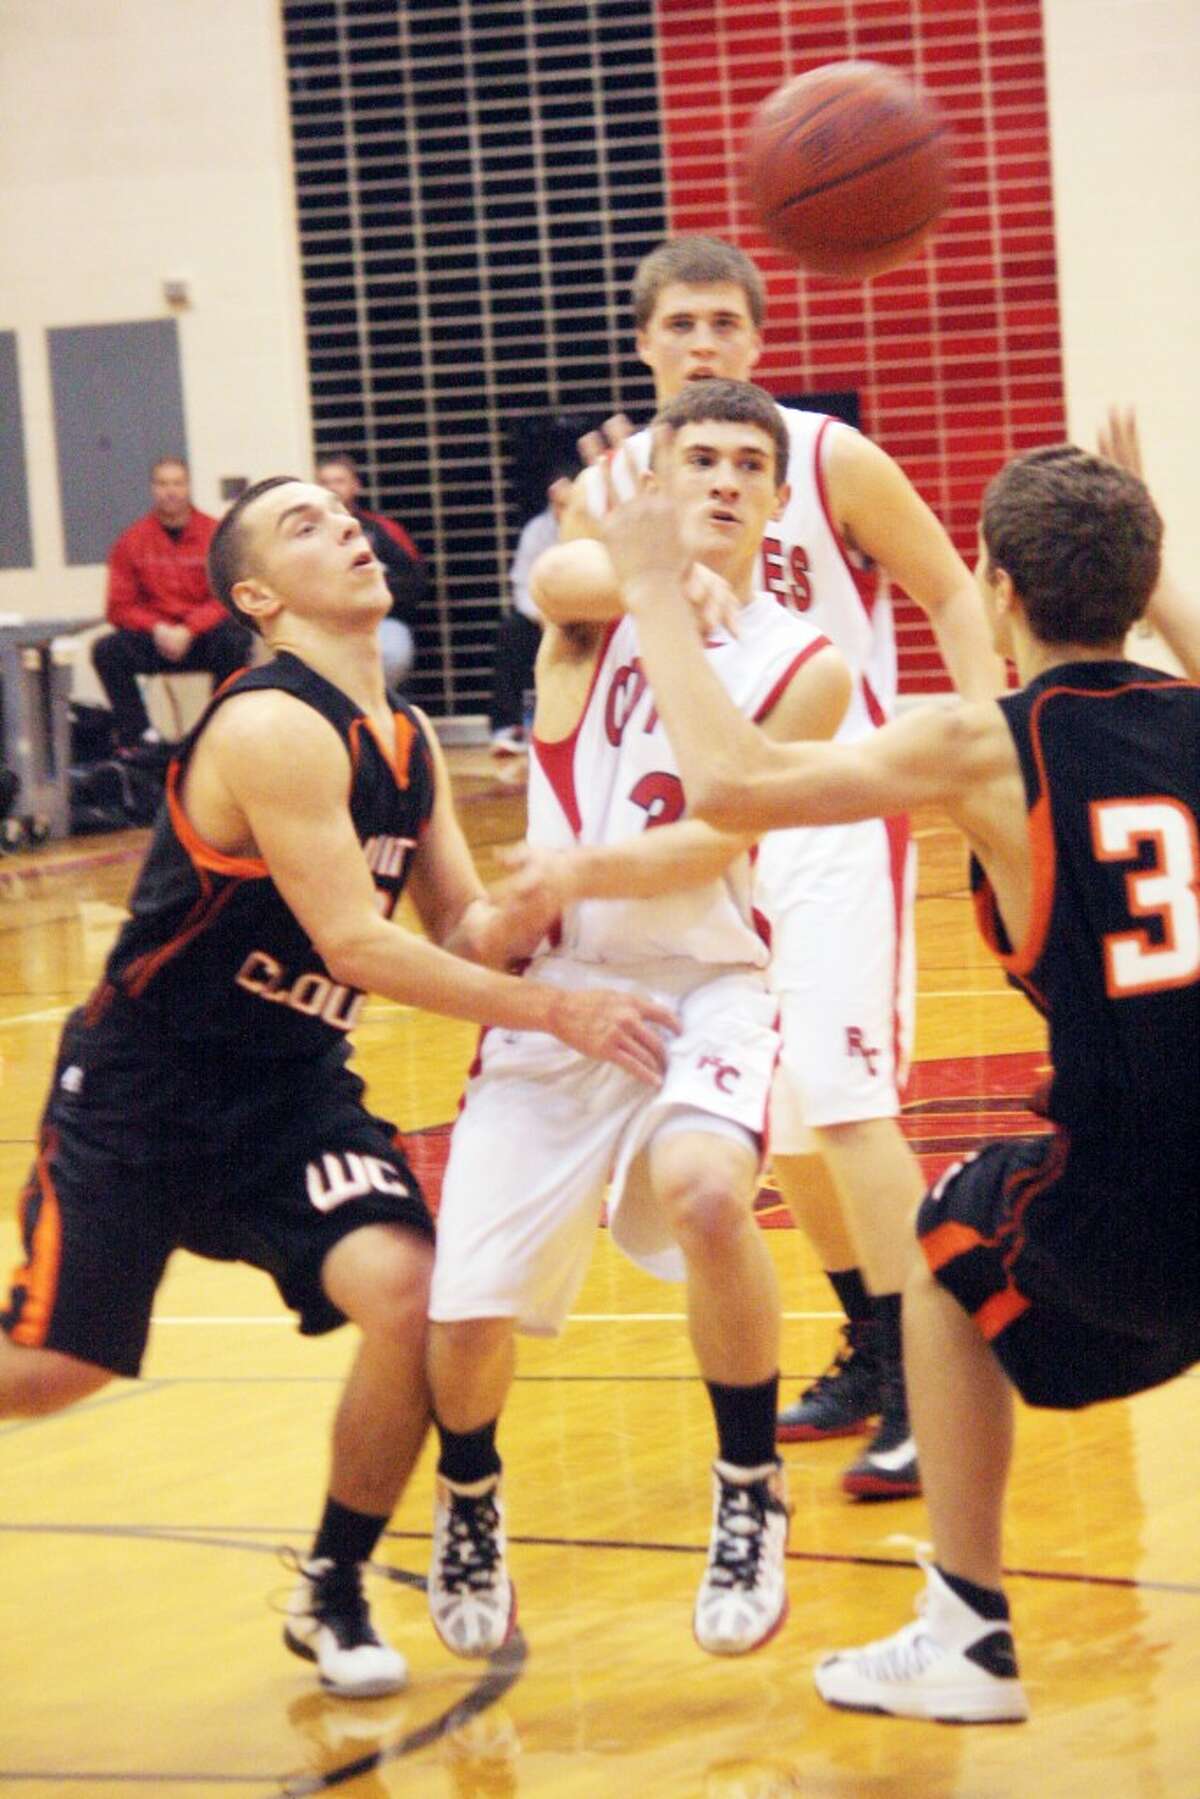 DRAWING ATTENTION: Reed City guard Joshua Saez (middle) makes a pass through traffic during Monday’s game against White Cloud. The Coyotes defeated White Cloud 73-37 to improve to 6-4 on the season. (Herald Review photo/John Raffel)